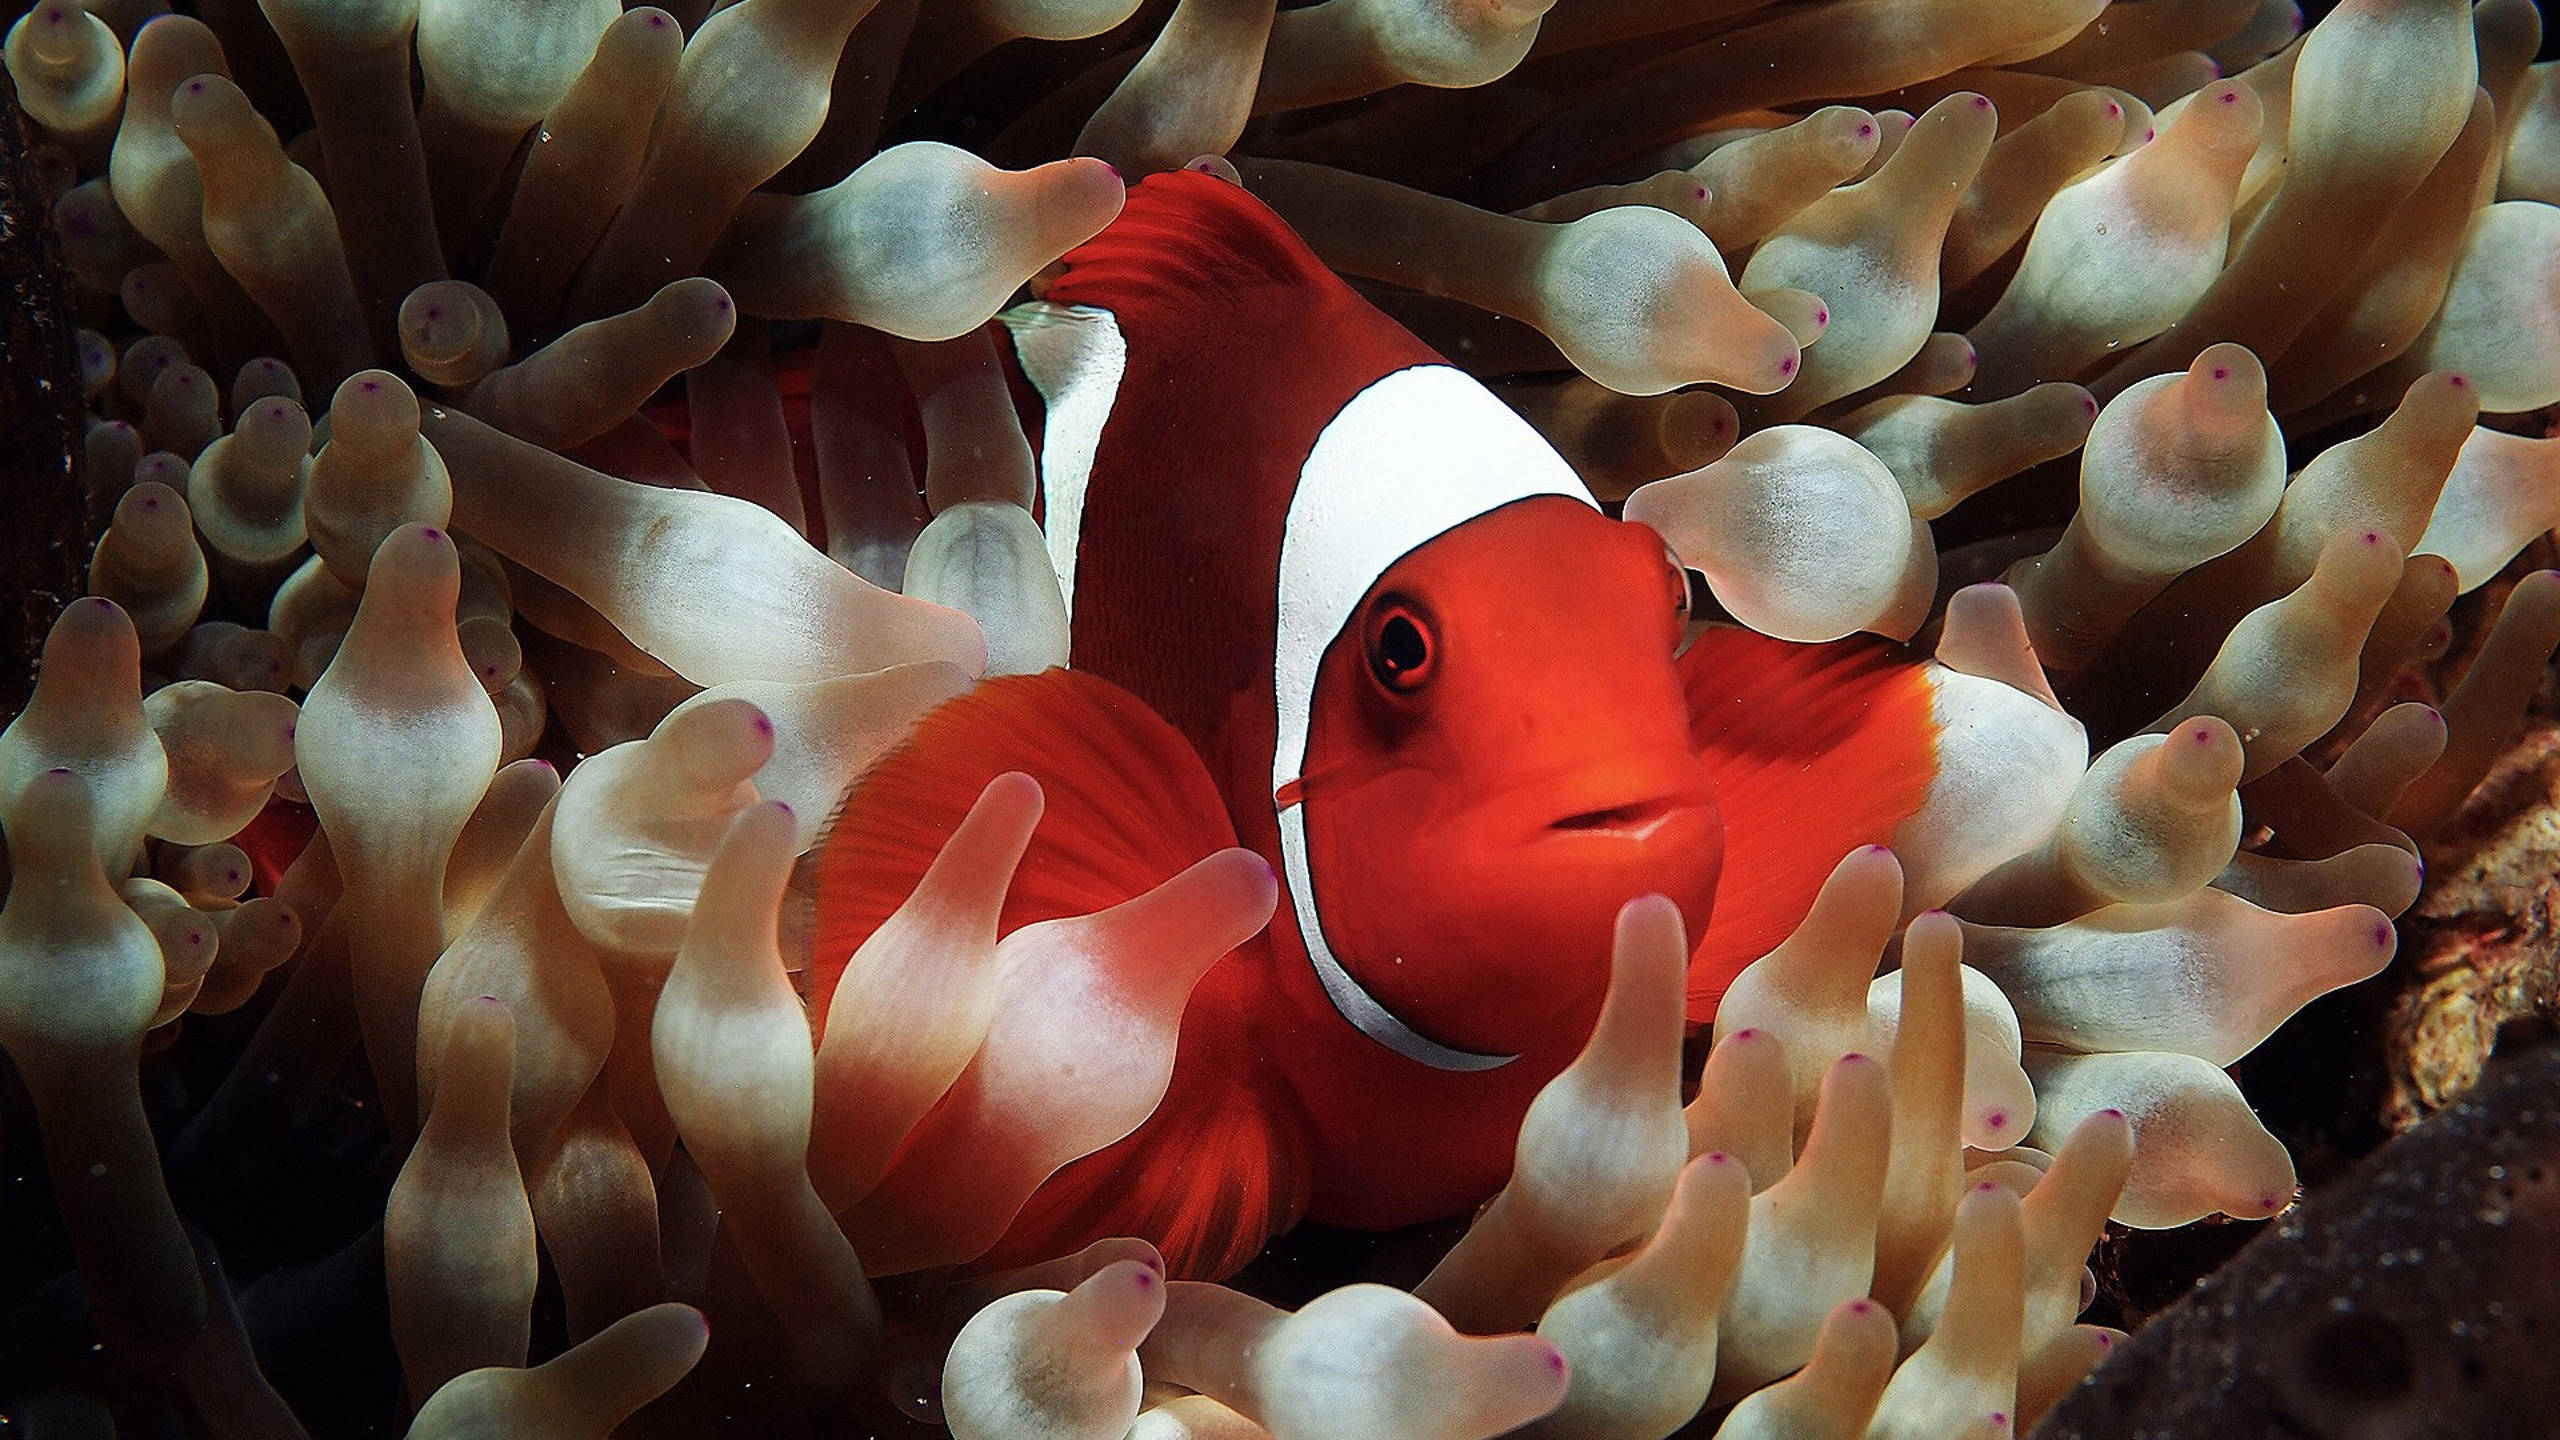 Clown Fish: Anemonefish communicating through popping and clicking noises. 2560x1440 HD Wallpaper.